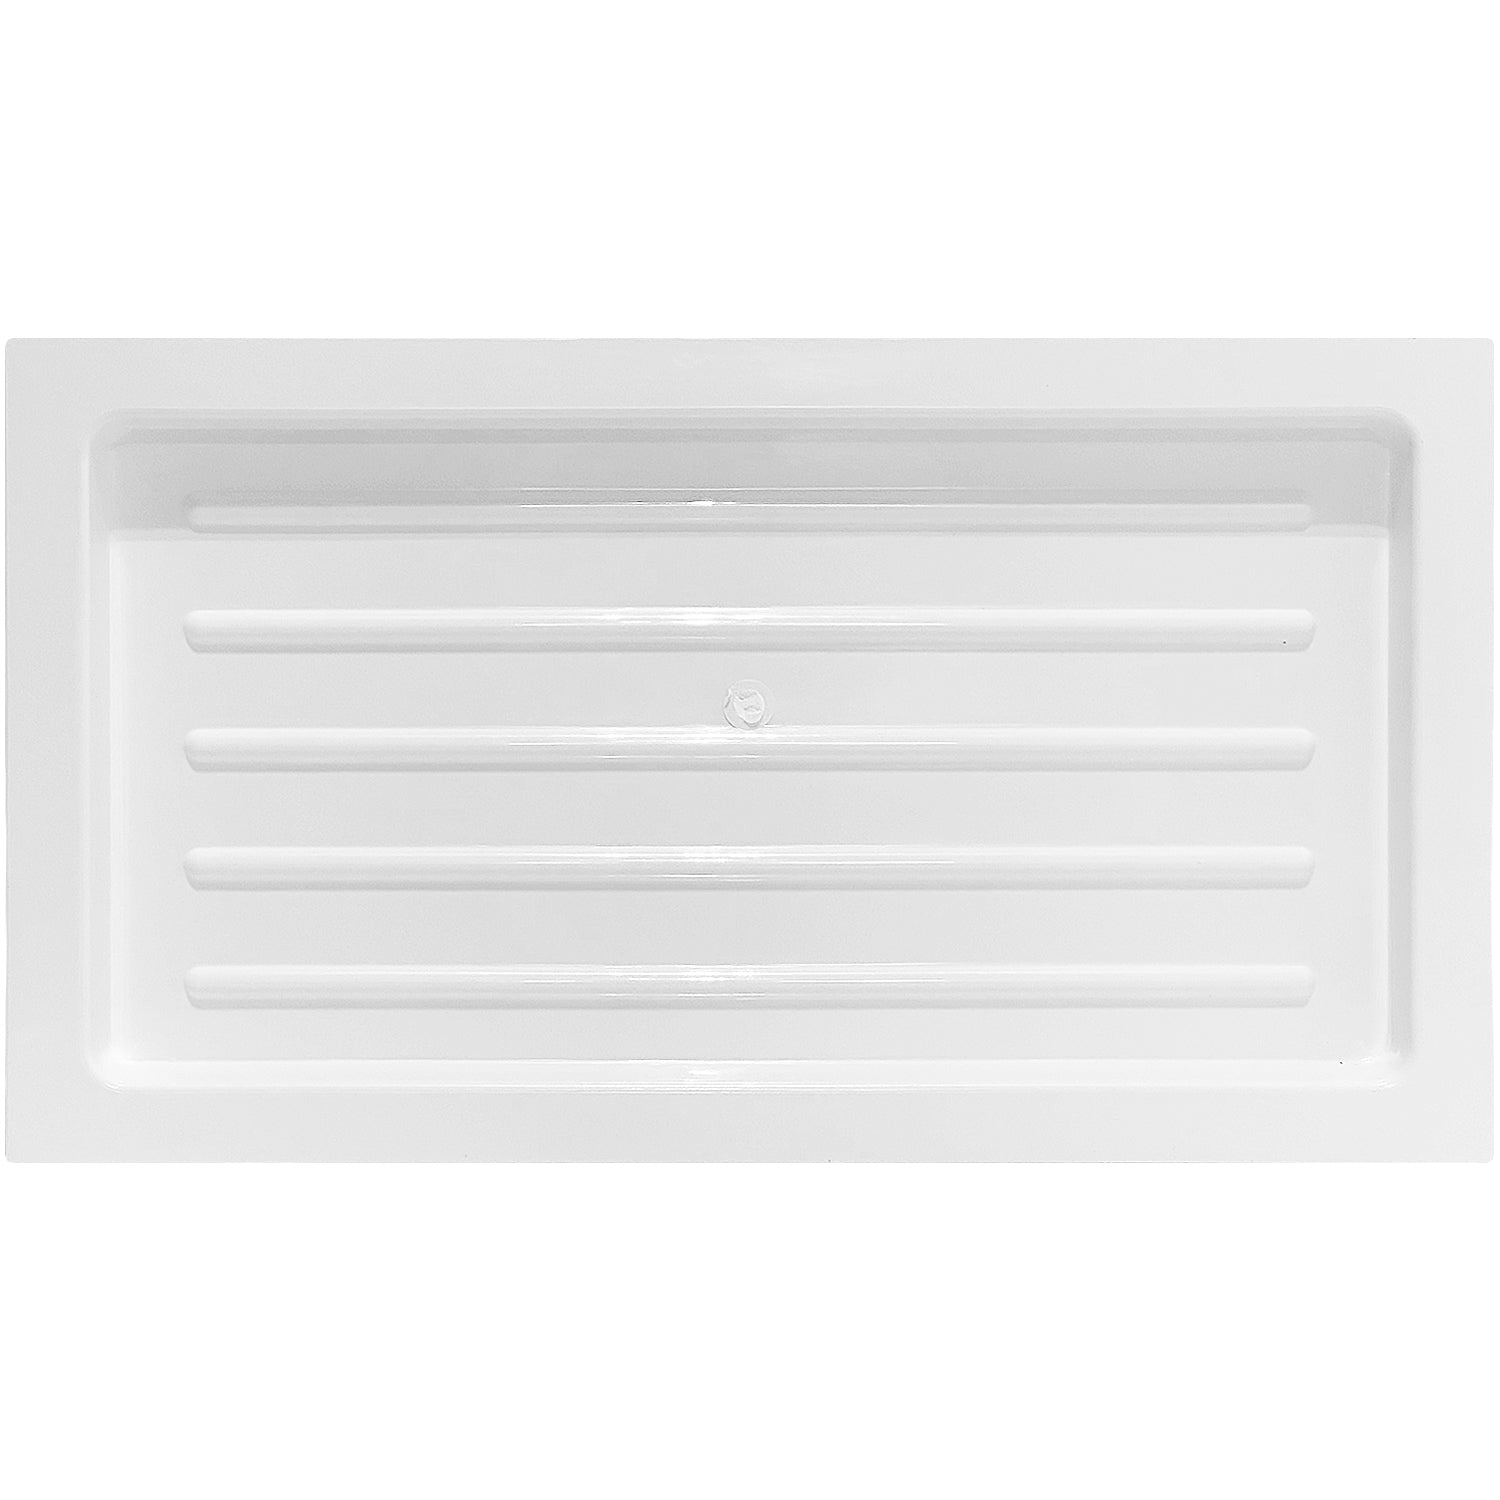 Back of outward mounted vent cover (white)